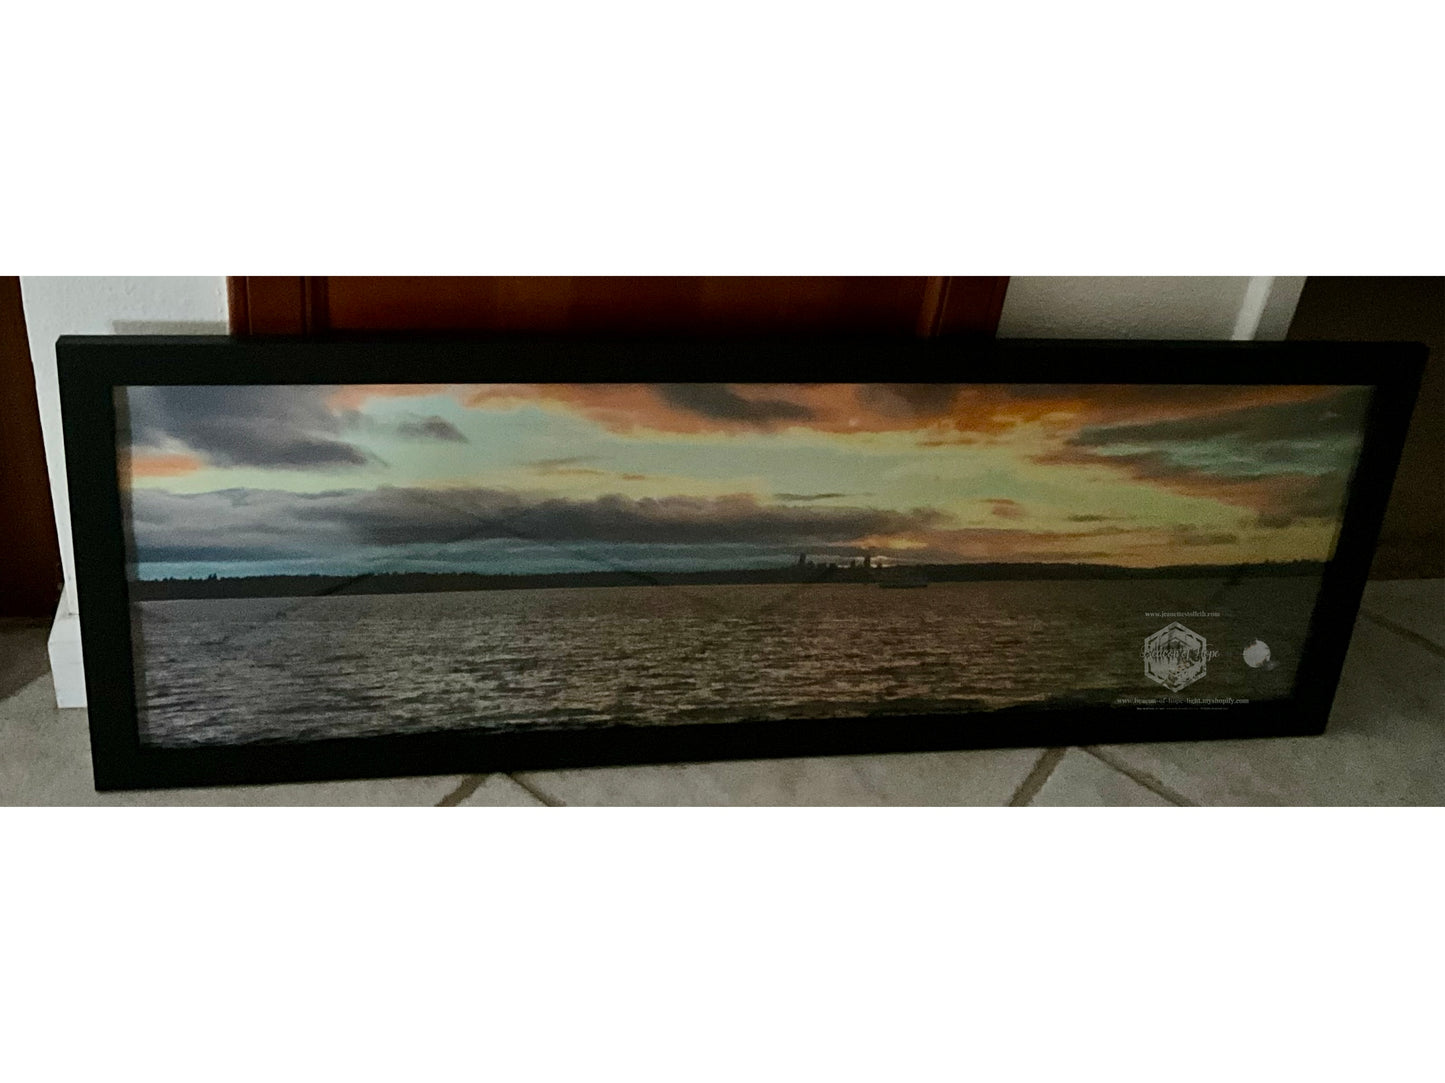 “Seattle from the East Side” - Kirkland, WA Waterfront. Original Photography Framed. Signed.